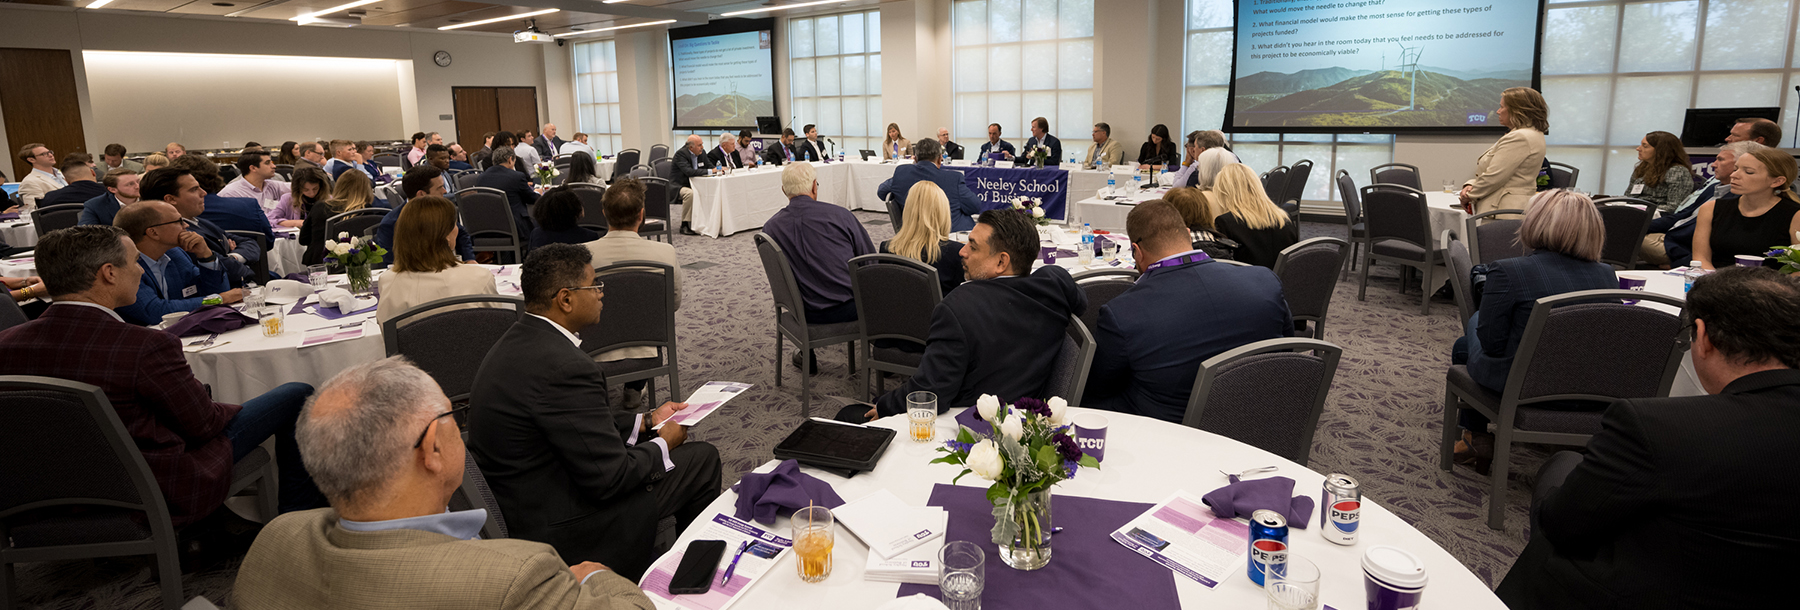 Section Image: TCU Energy Summit in the Hays Banquet Room 